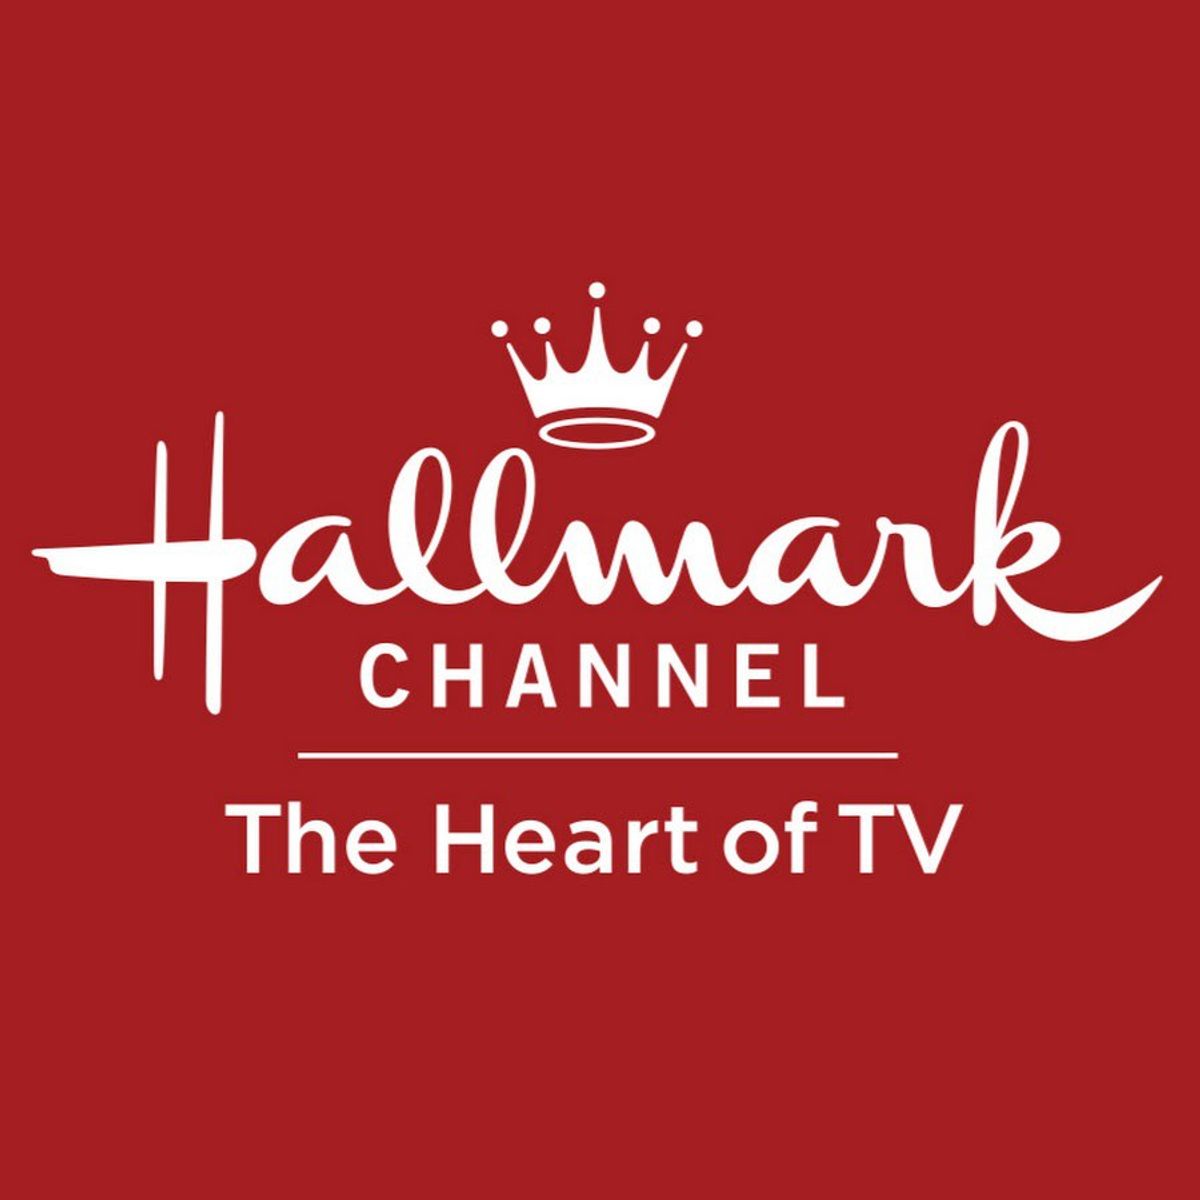 An Open Letter To The Hallmark Channel